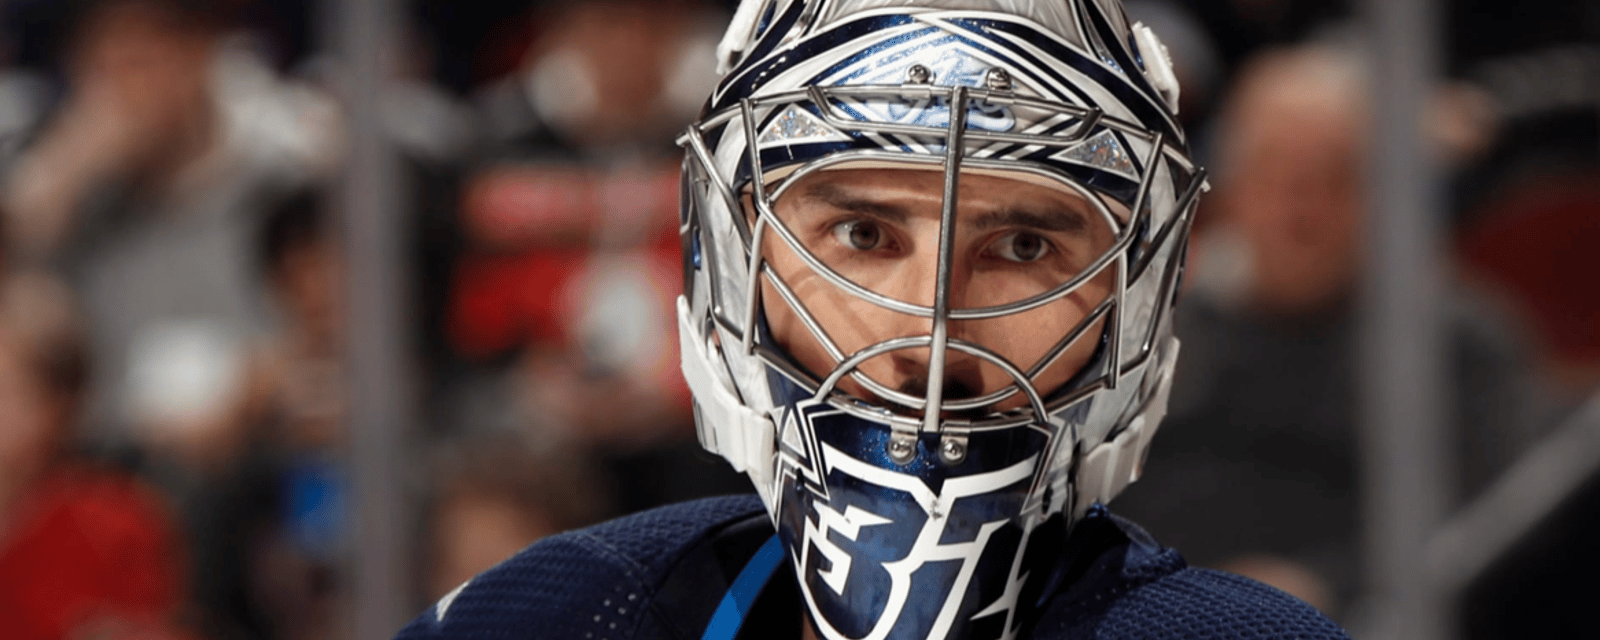 Reported “mutual interest” between Connor Hellebuyck and Metropolitan Division team